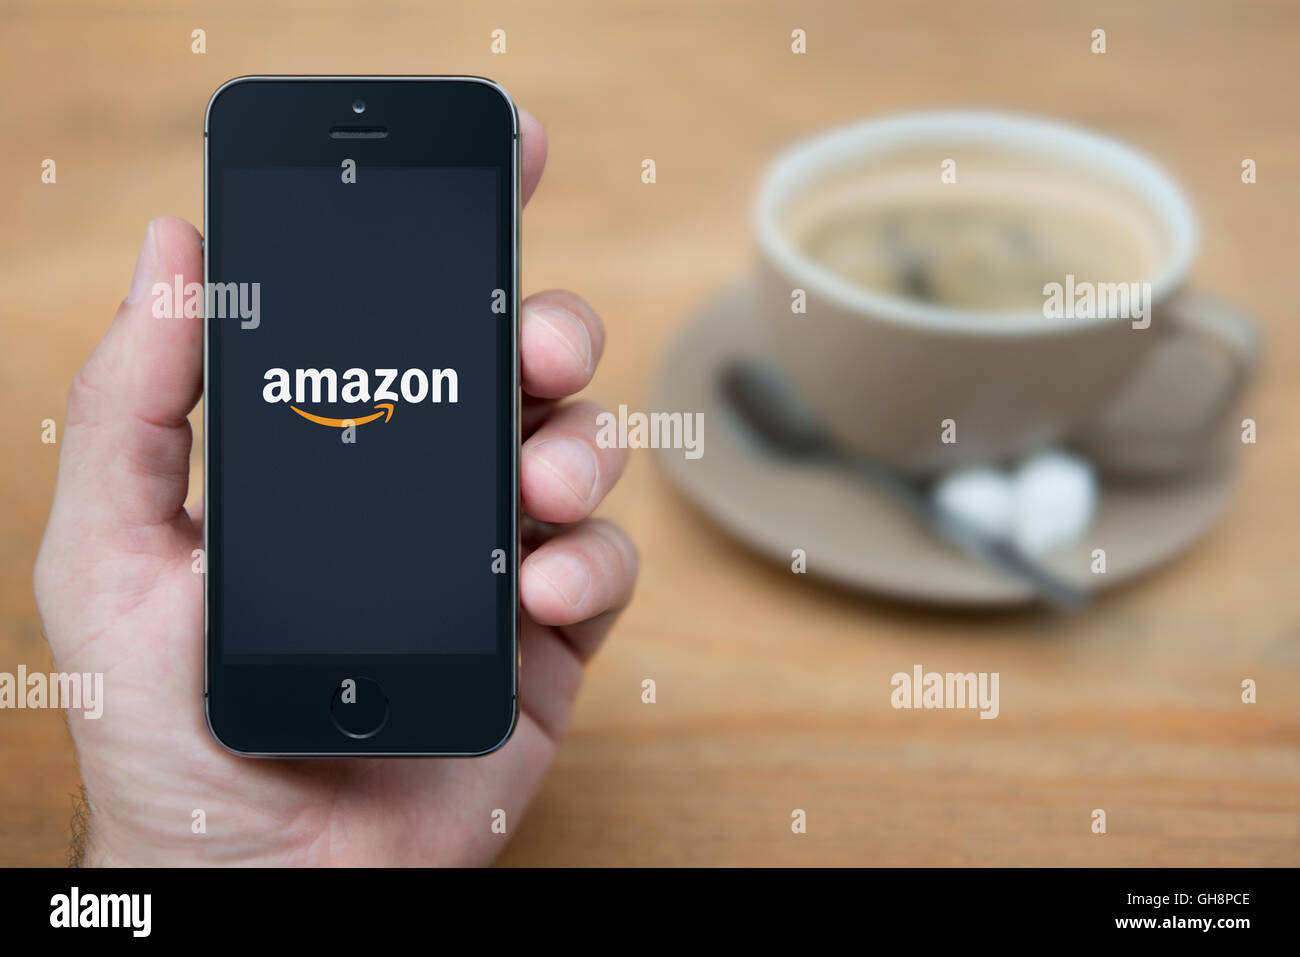 A man looks at his iPhone which displays the Amazon logo, while sat with a cup of coffee (Editorial use only). Stock Photo